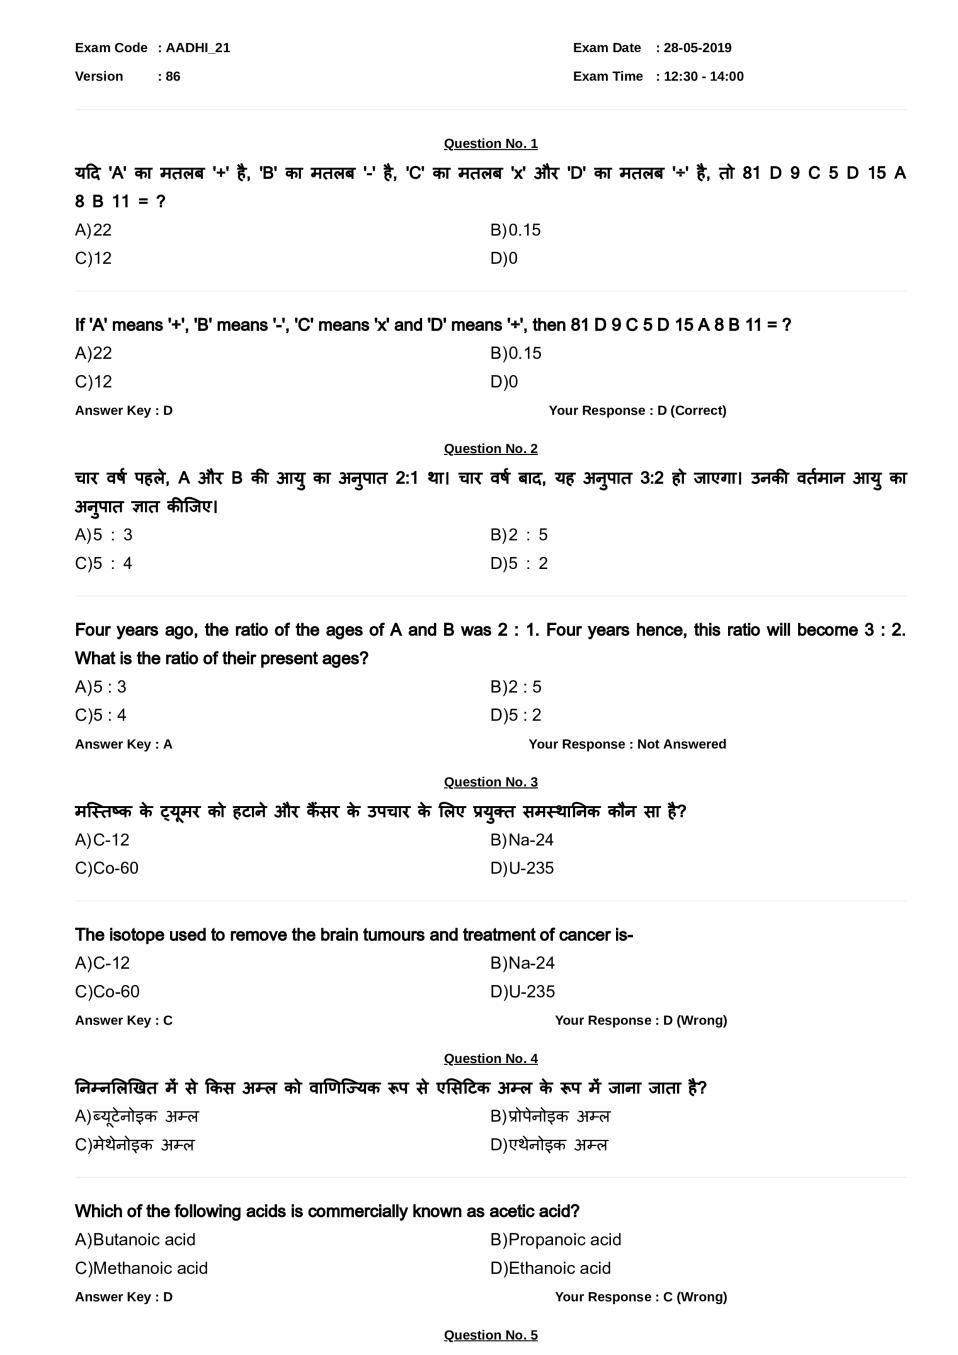 RRB JE Question Paper with Answers for 28 May 2019 Exam Shift 2 - Page 1